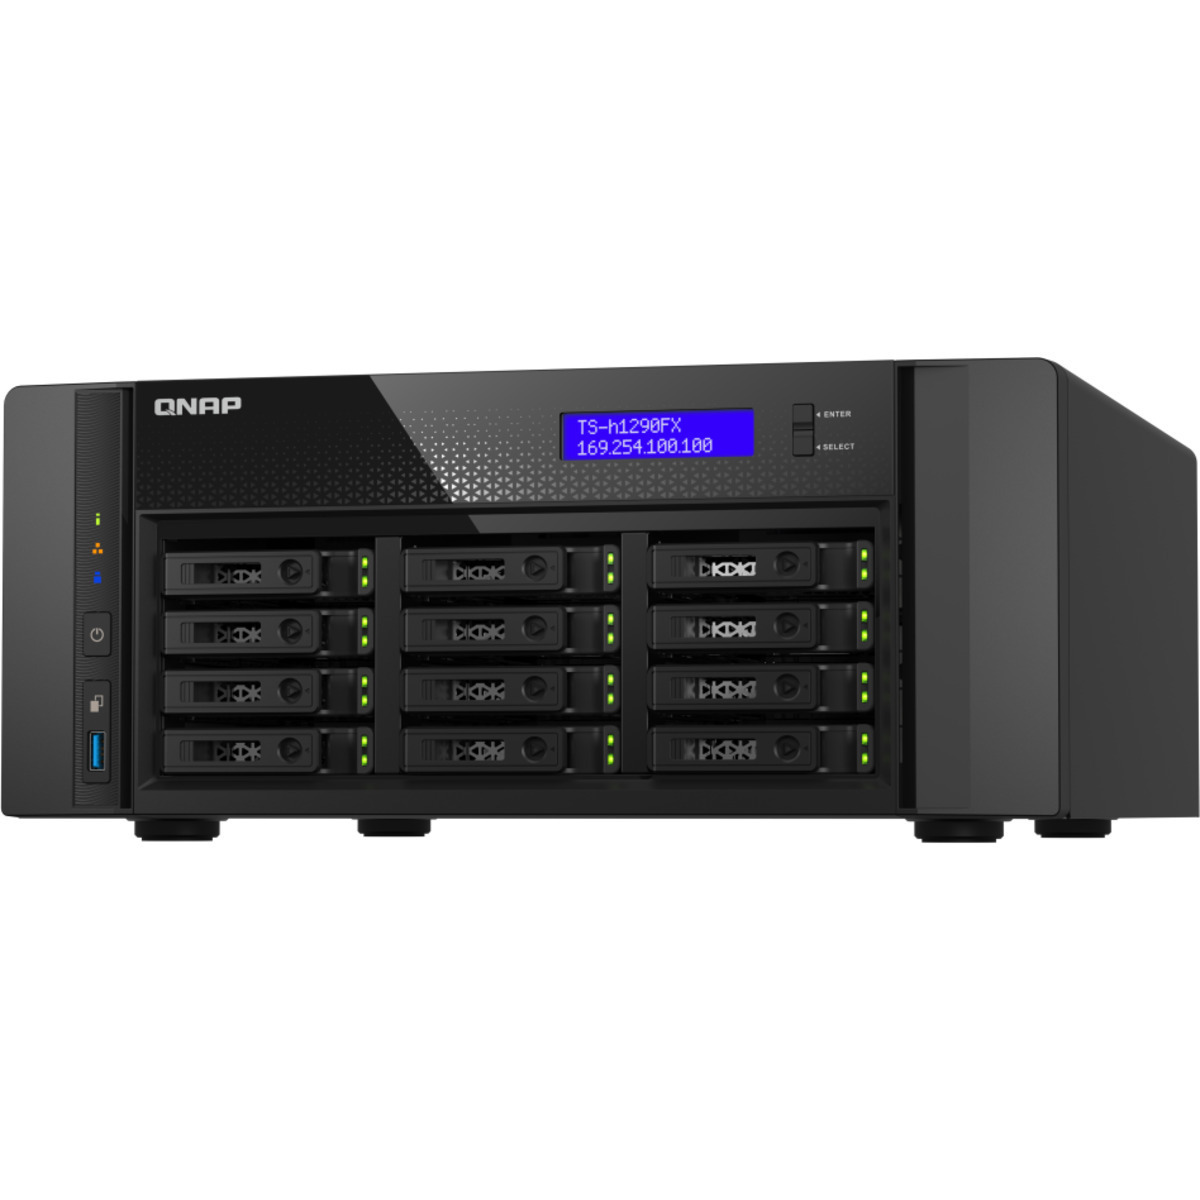 QNAP TS-h1290FX QuTS 7232P hero Edition 48tb 12-Bay Desktop Large Business / Enterprise NAS - Network Attached Storage Device 12x4tb Western Digital Red SA500 WDS400T1R0A 2.5 560/530MB/s SATA 6Gb/s SSD NAS Class Drives Installed - Burn-In Tested TS-h1290FX QuTS 7232P hero Edition